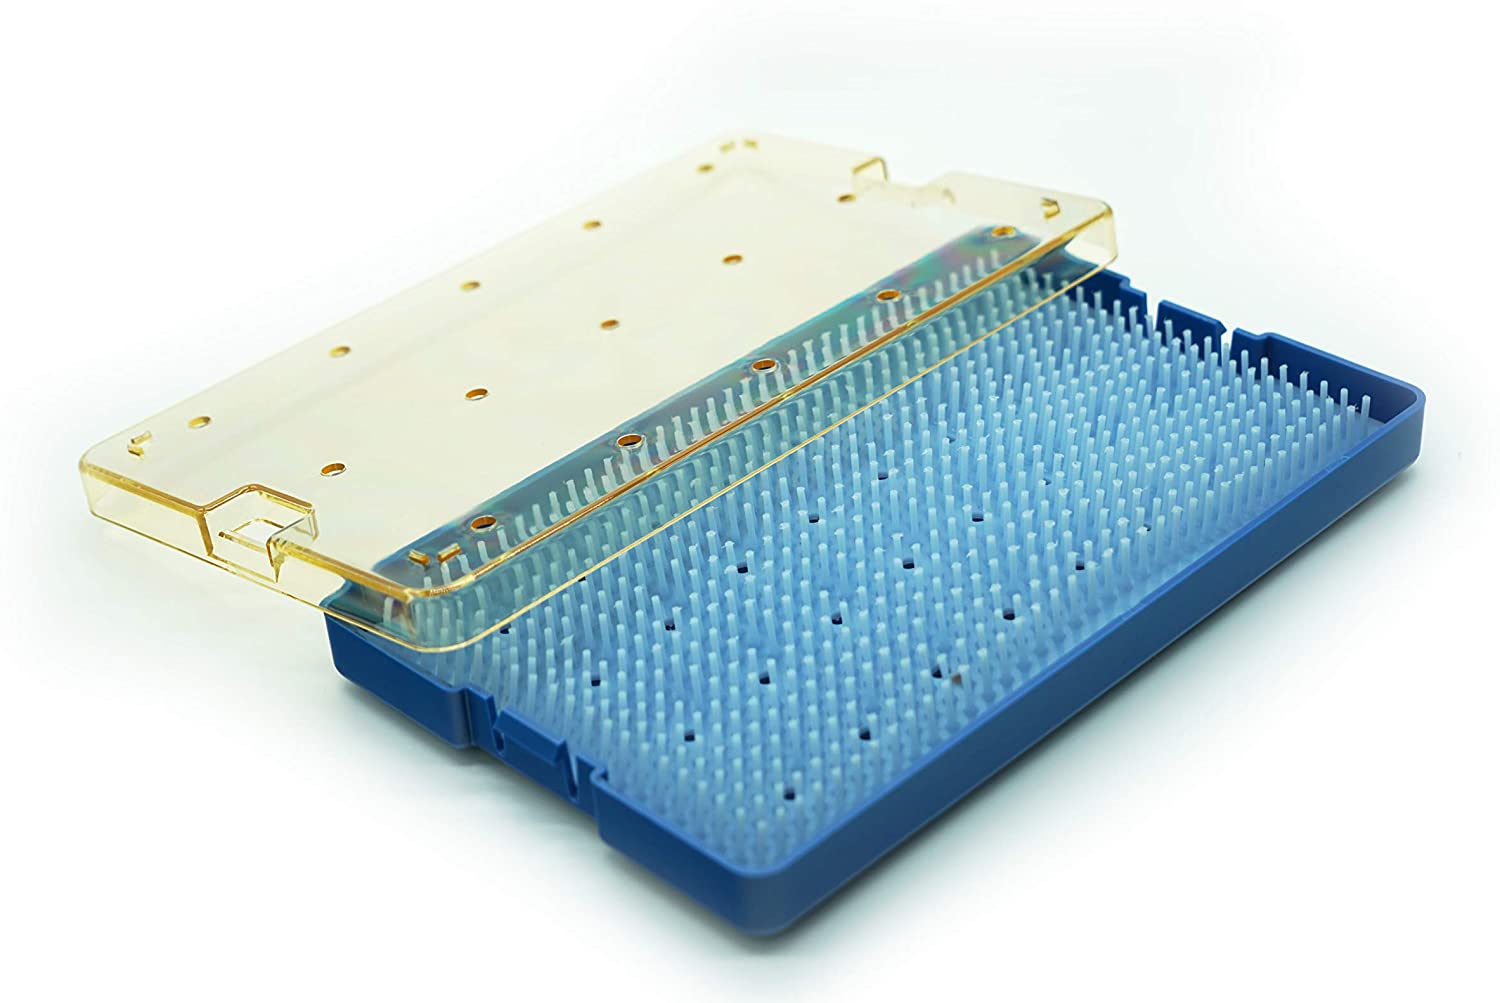 Big Plastic Sterilization Tray Case with Silicone Mat Ophthalmic Eye Instrument - Lunar Health Store